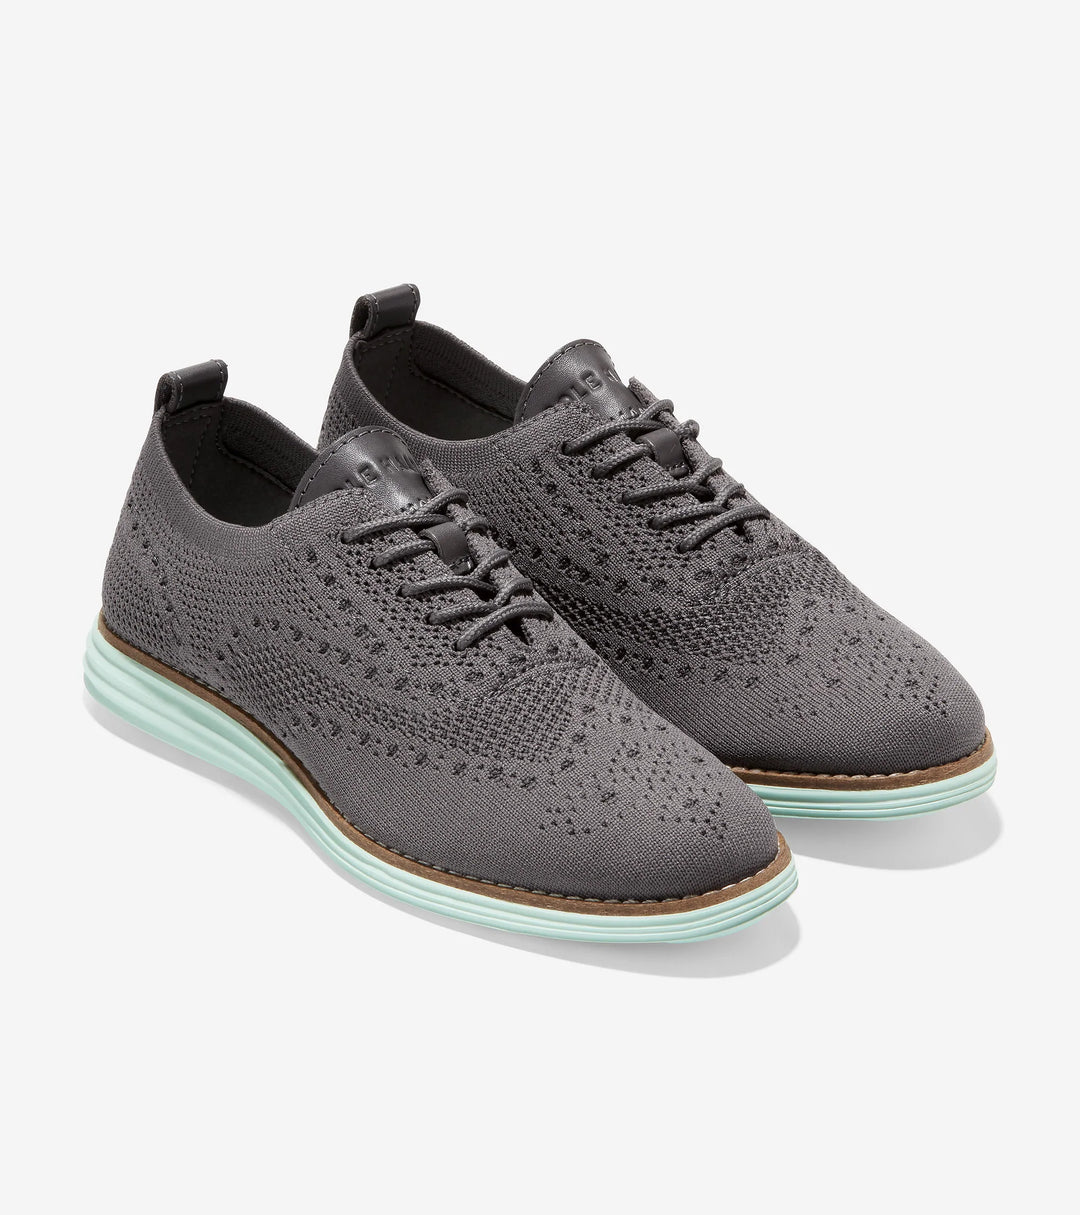 Women's Cole Haan OG Grand Stitchlite Wing Oxford Dark Pavement - Orleans Shoe Co.